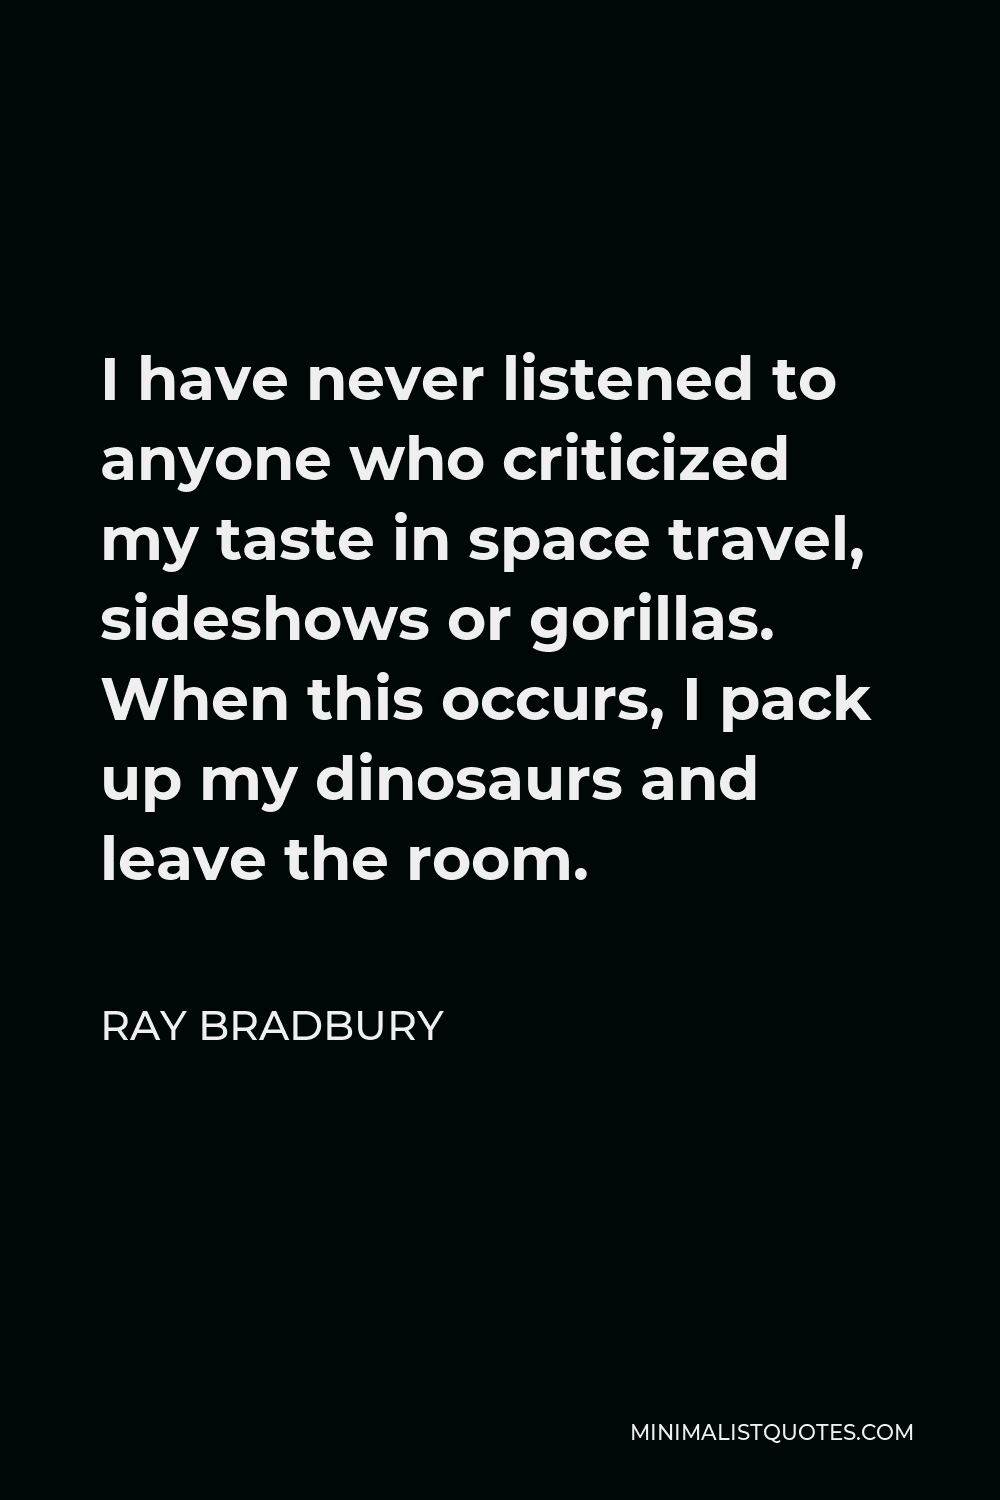 Ray Bradbury Quote - I have never listened to anyone who criticized my taste in space travel, sideshows or gorillas. When this occurs, I pack up my dinosaurs and leave the room.